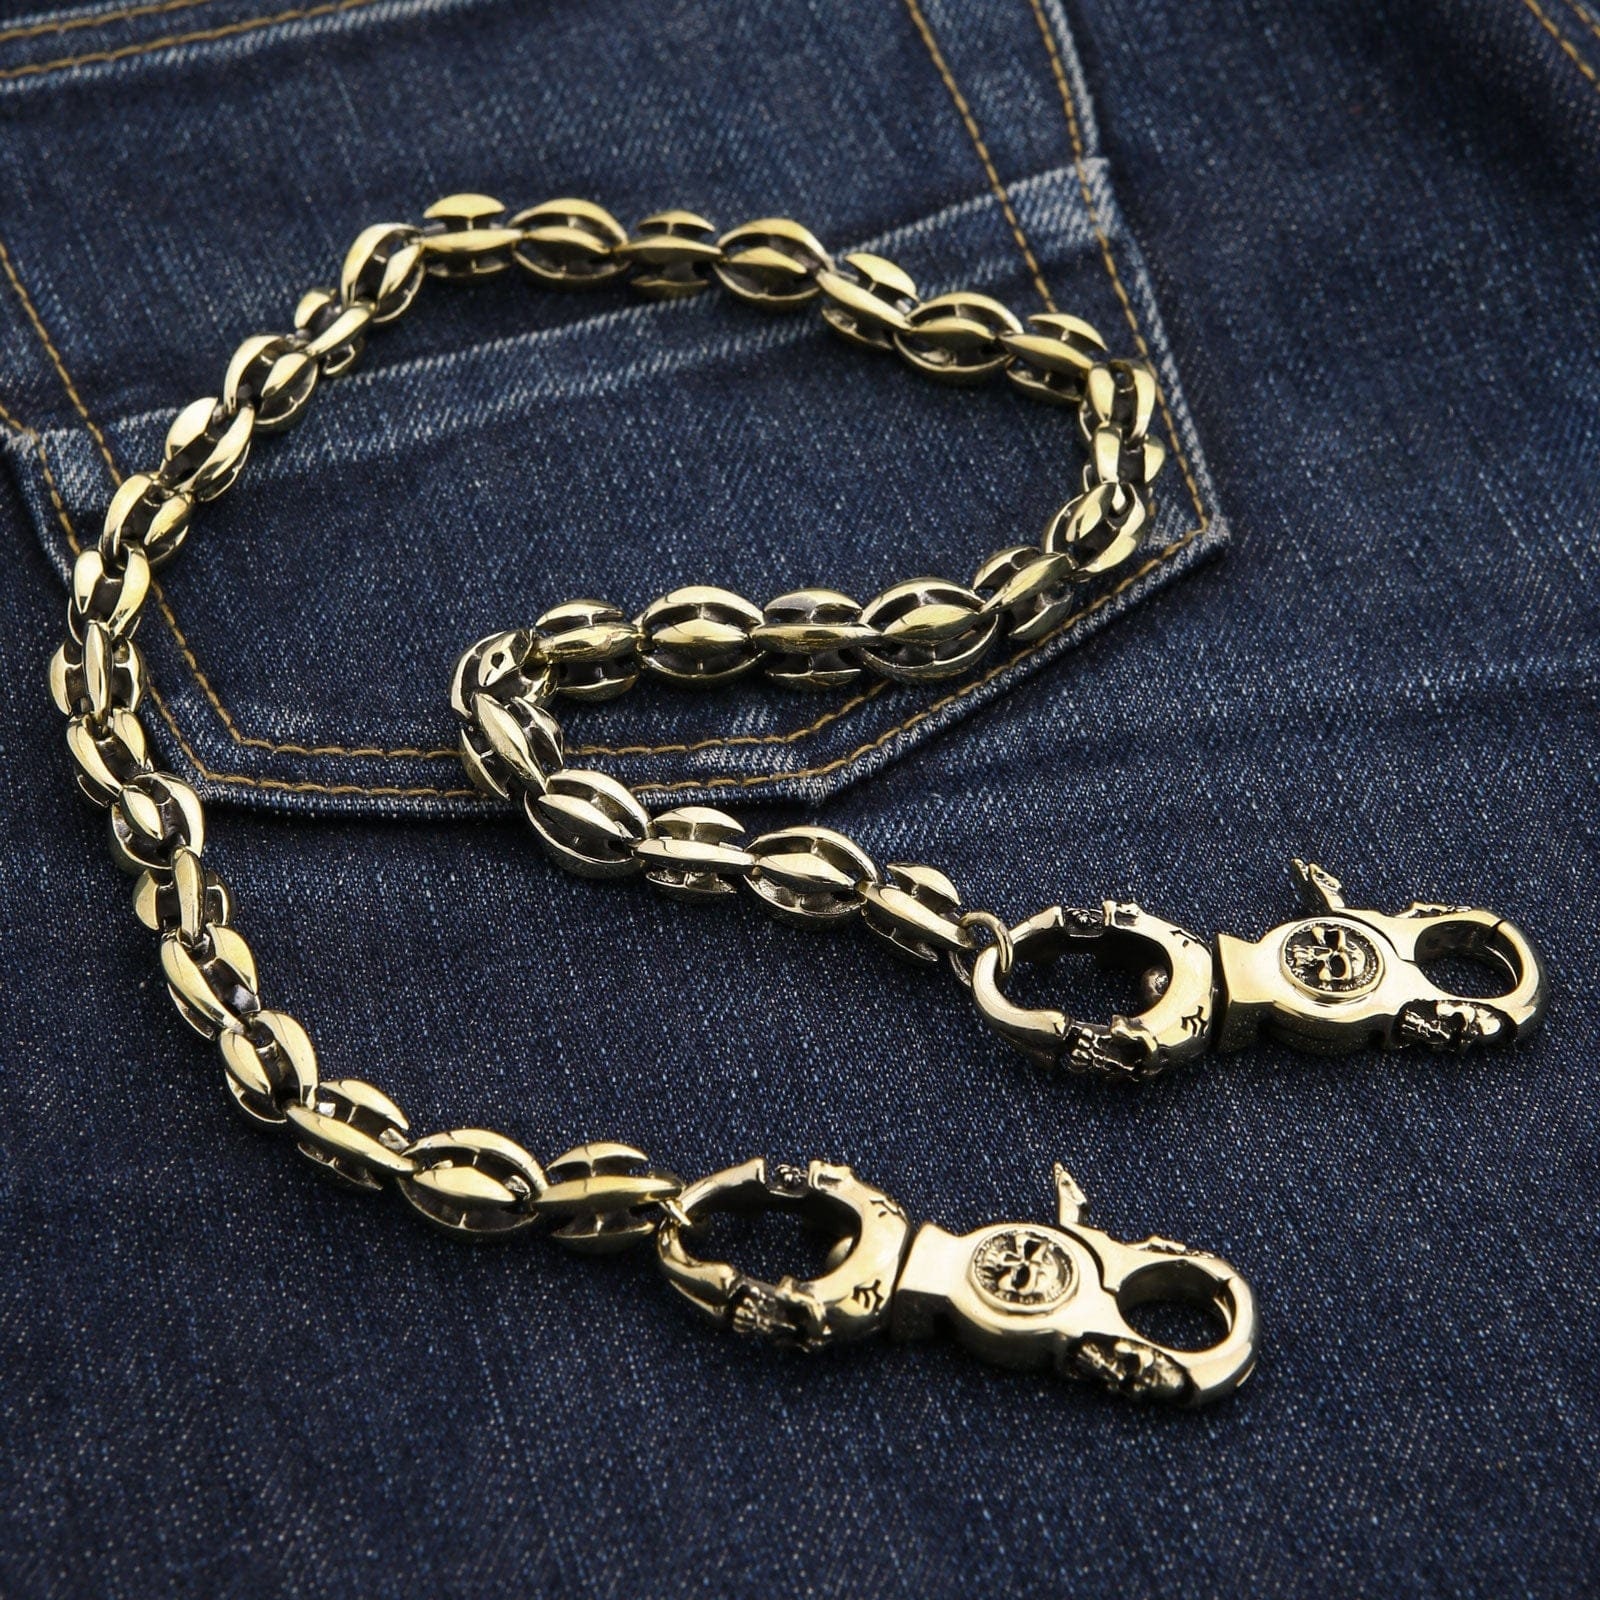 BROWN LEATHER STRAP WALLET CHAIN - antique brass – Fearless Leather